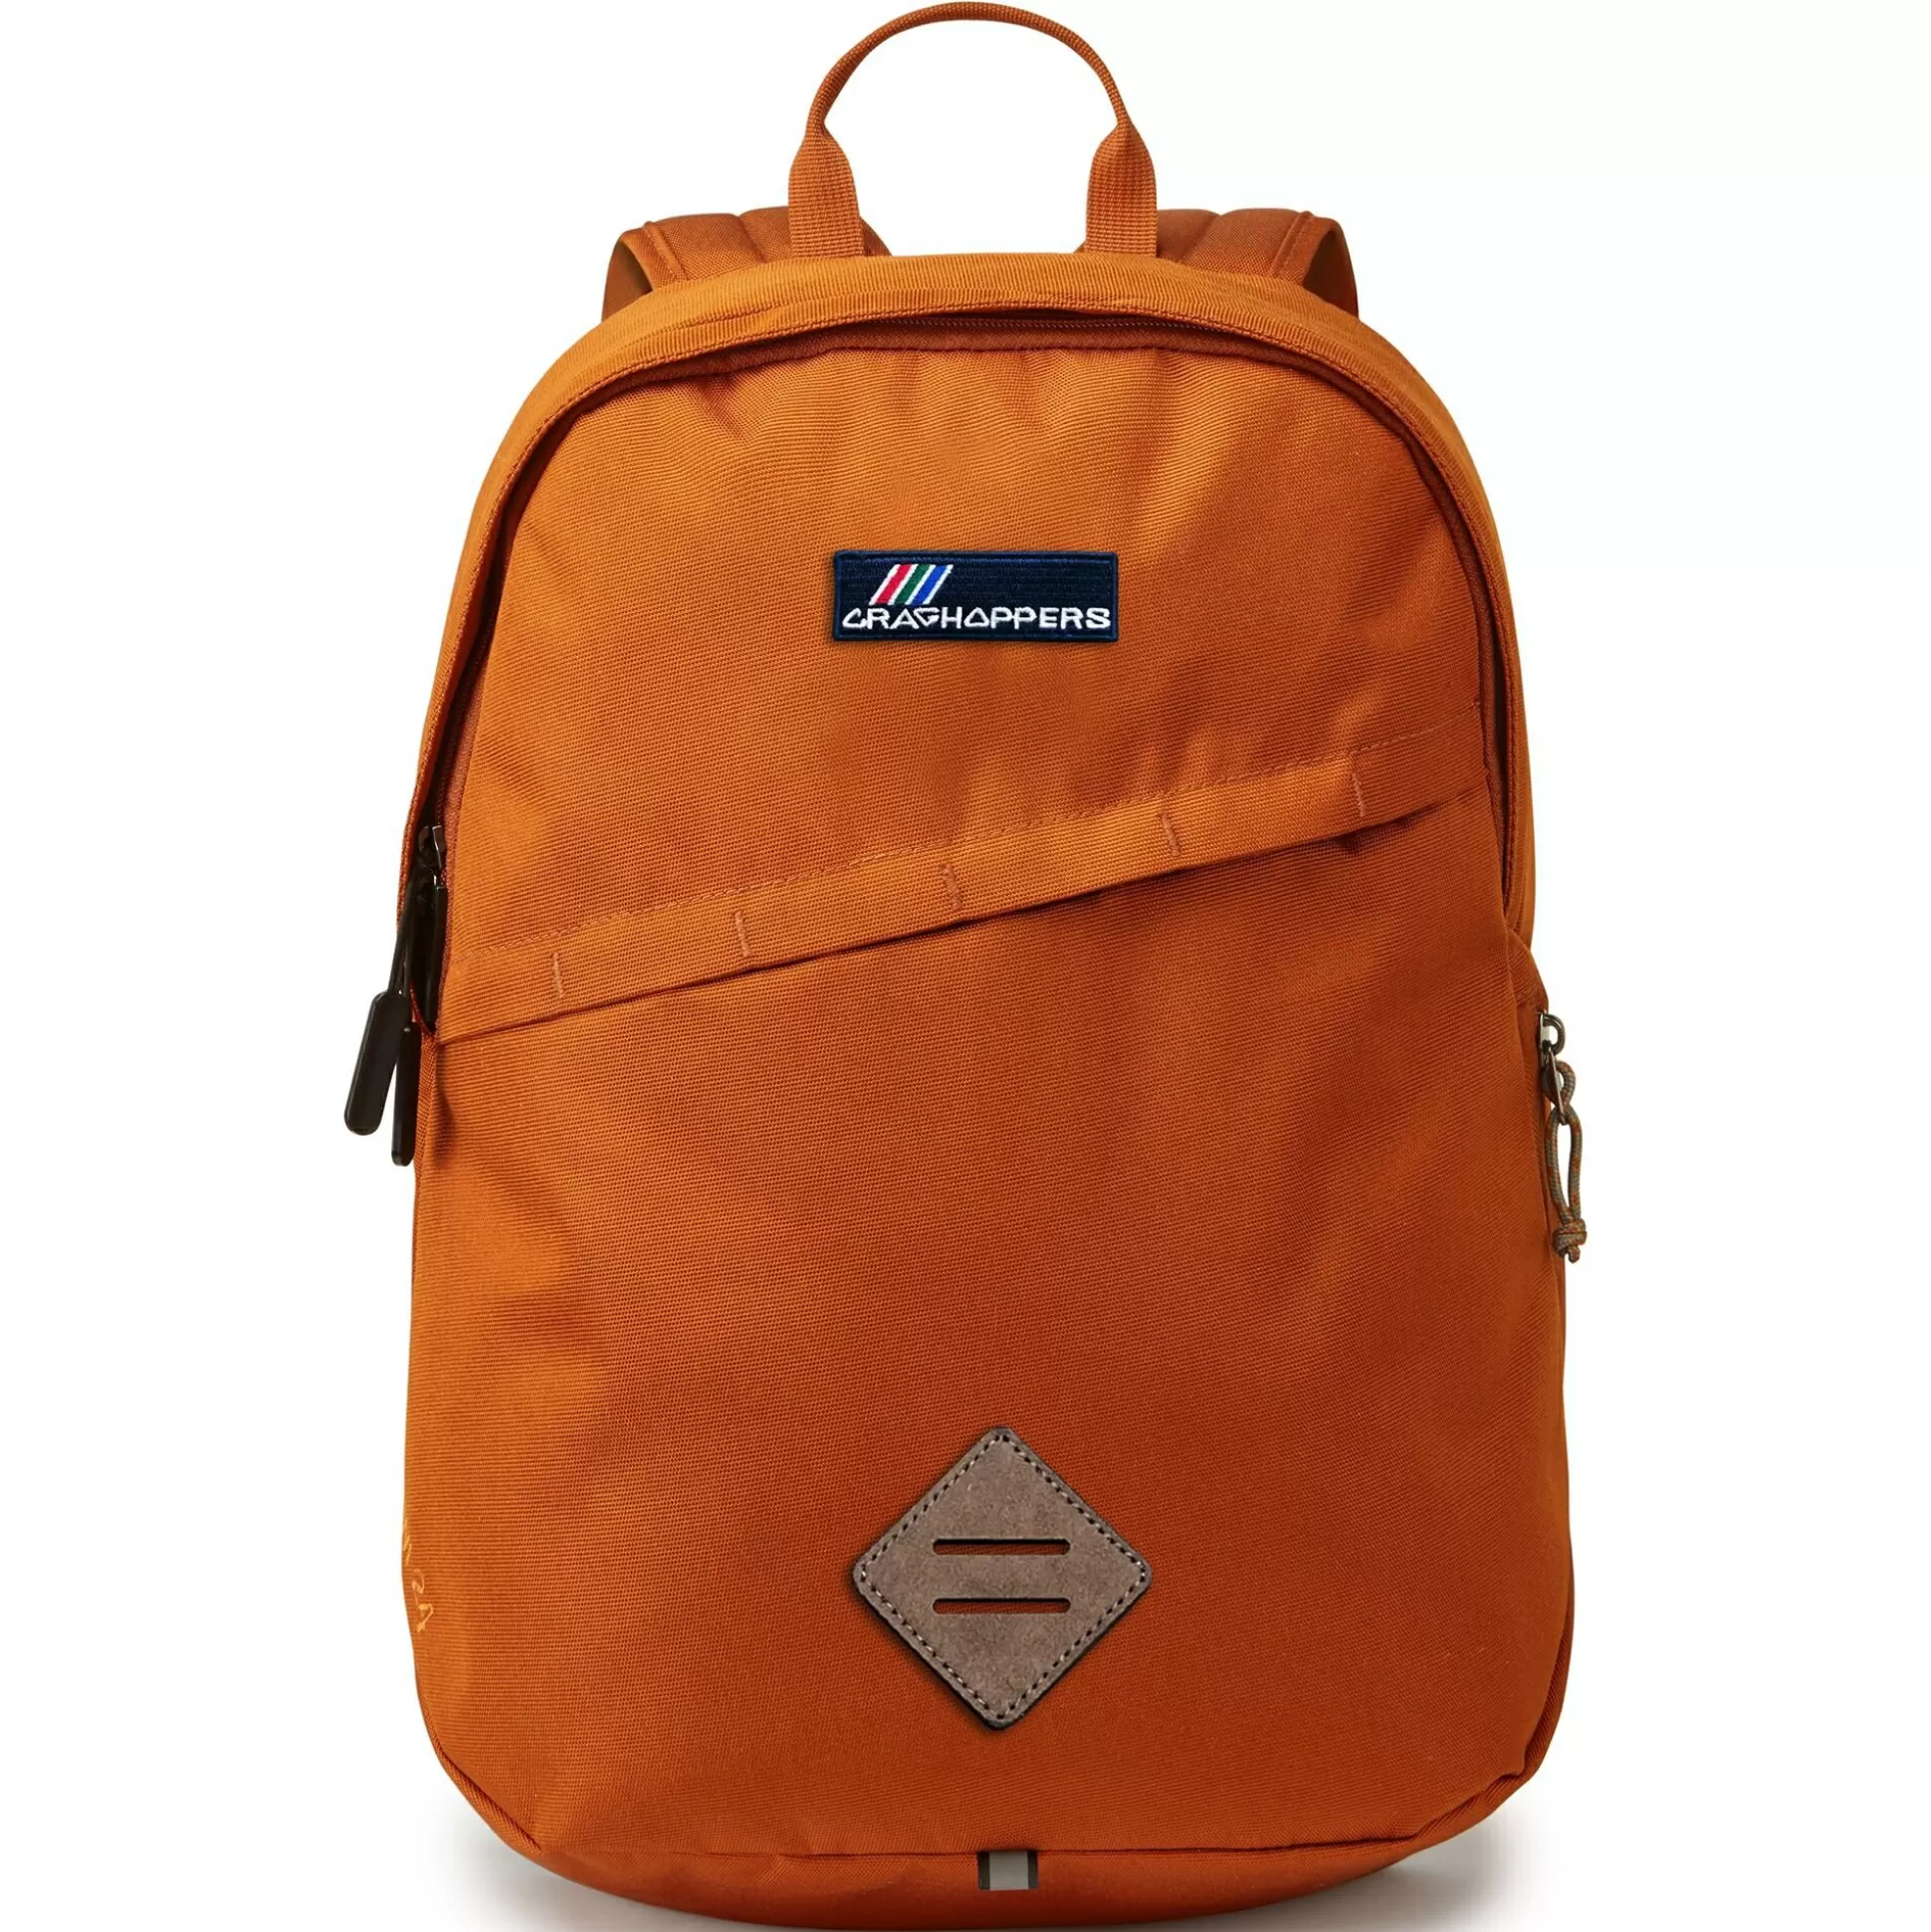 Craghoppers 22L Kiwi Classic Backpack - Potters Clay< Luggage